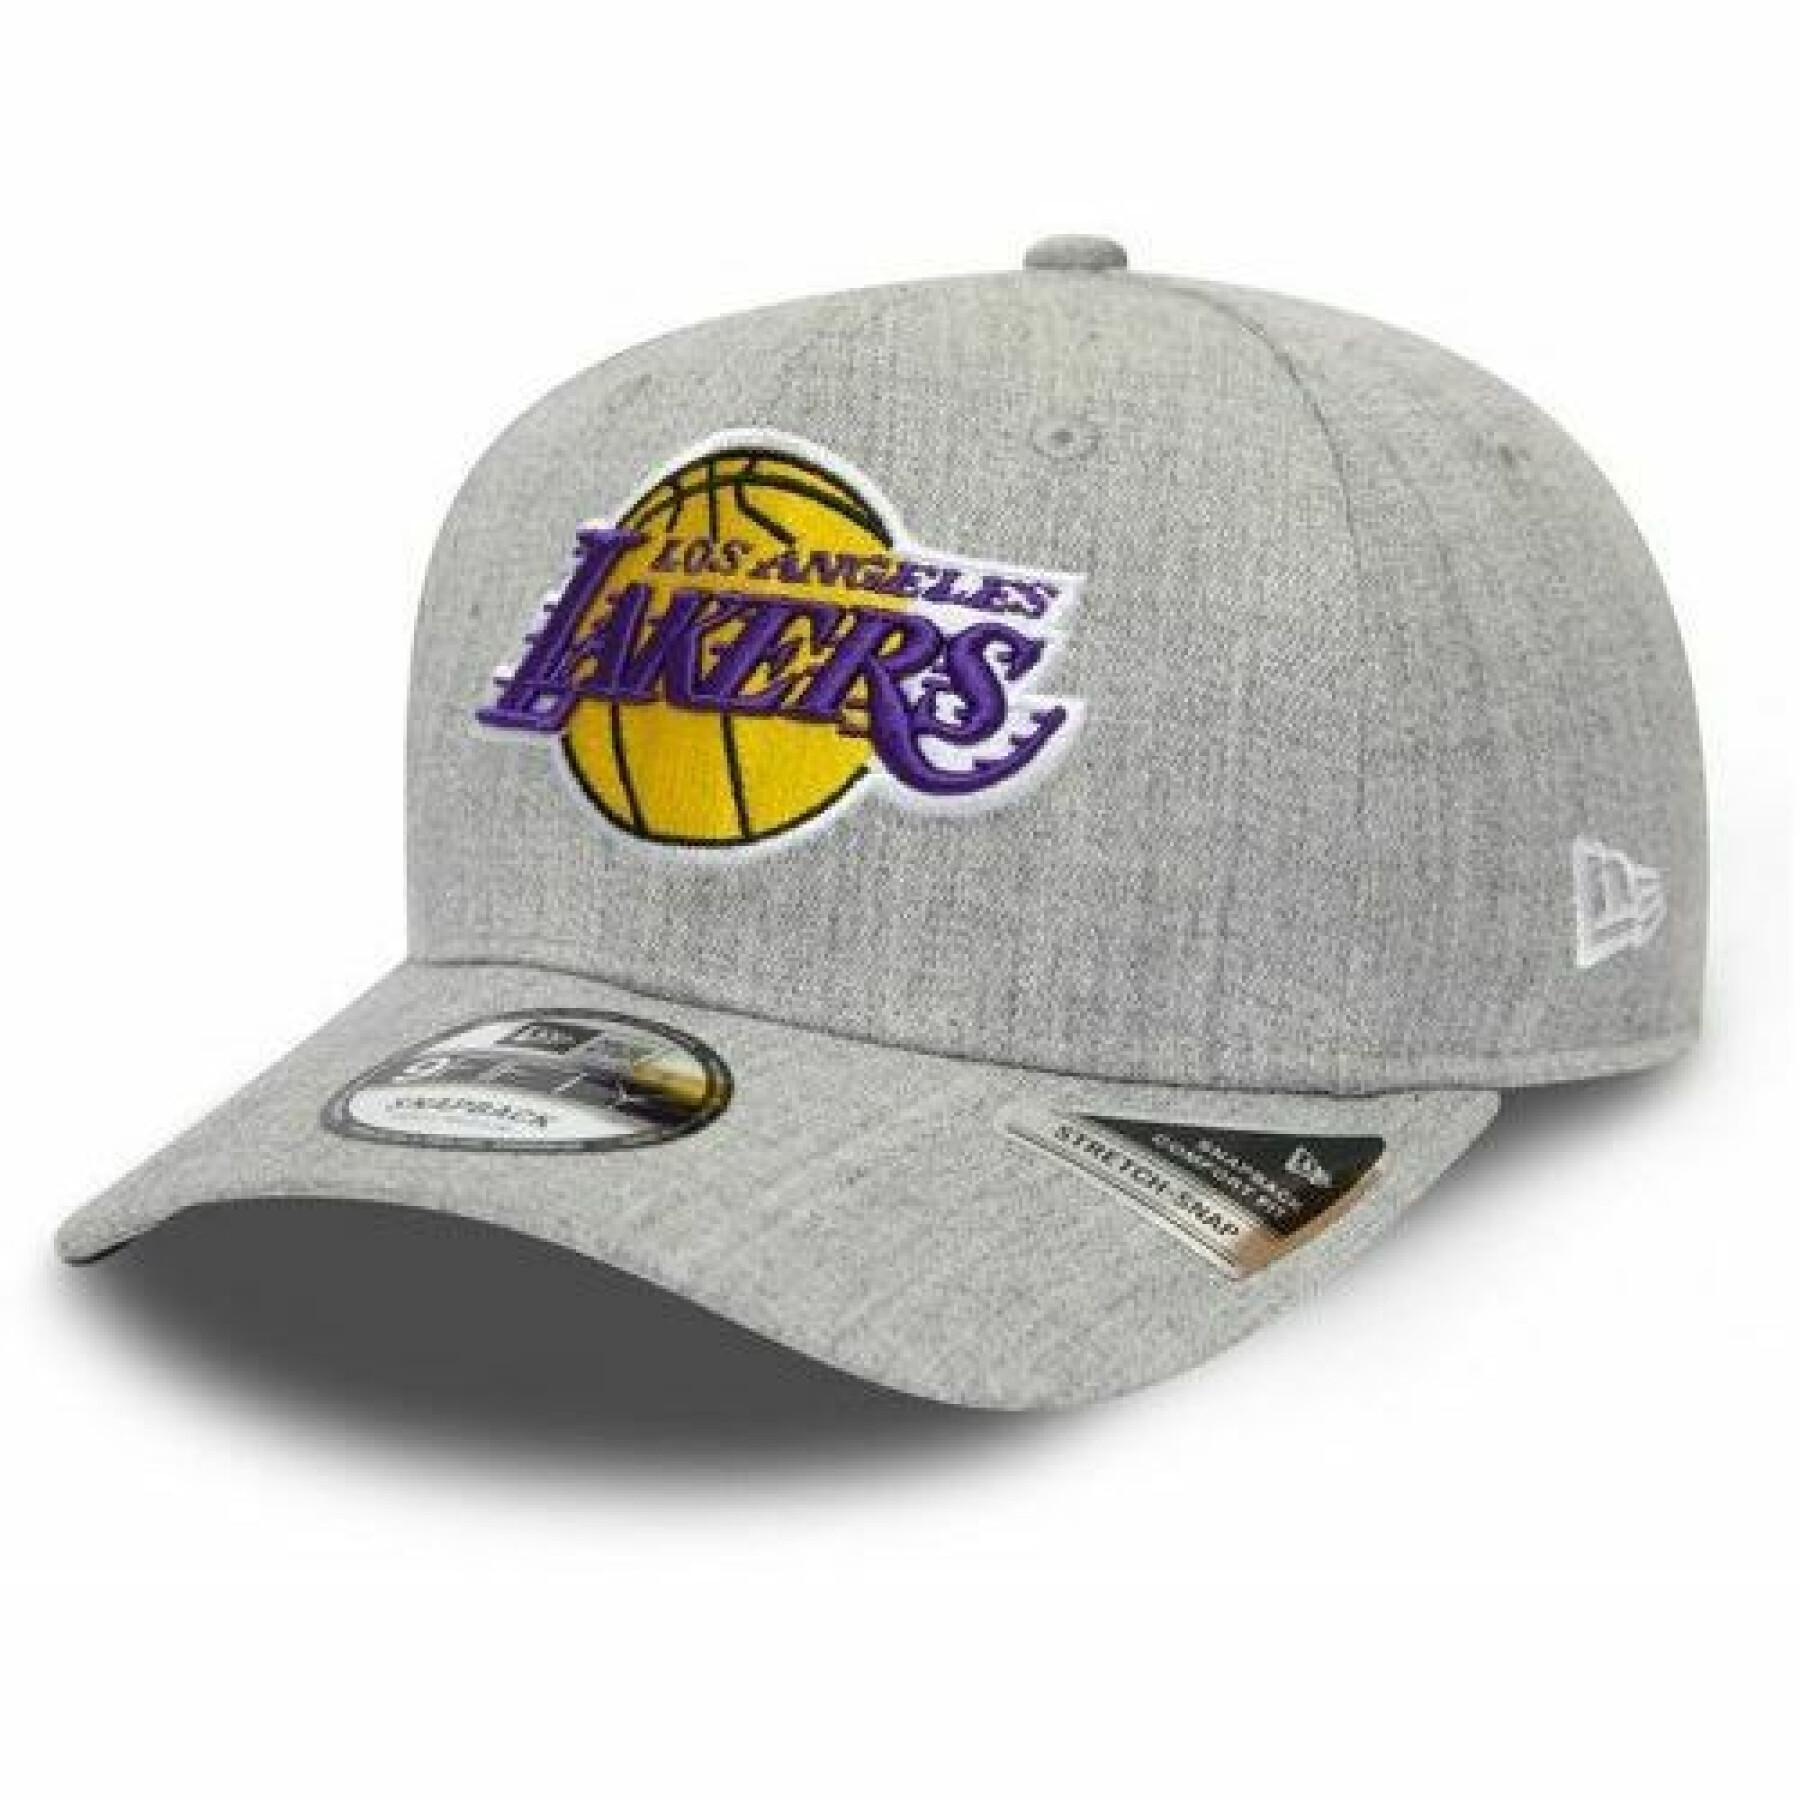 Casquette New Era Heather Base 950 Los Angeles Lakers